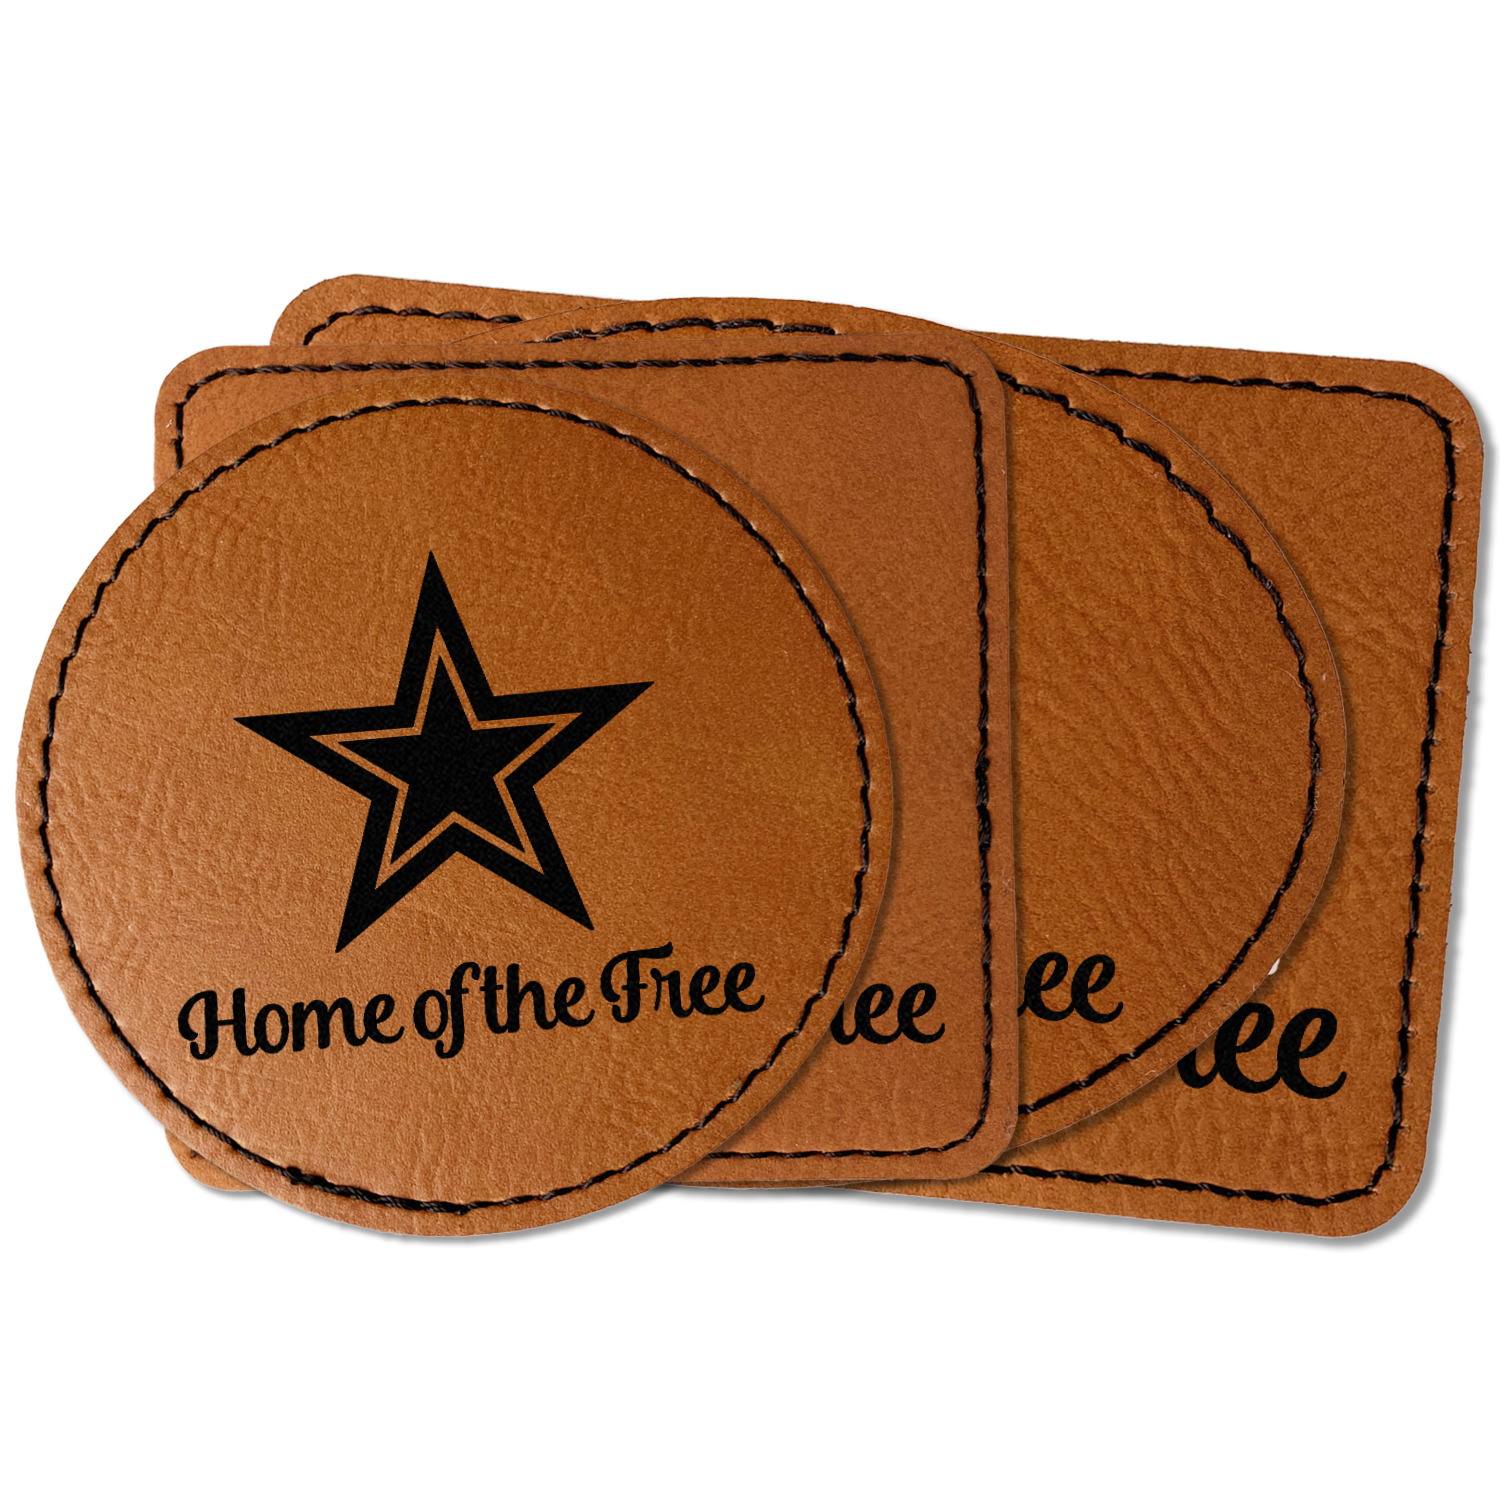 Custom Leather Patches, Made In the USA